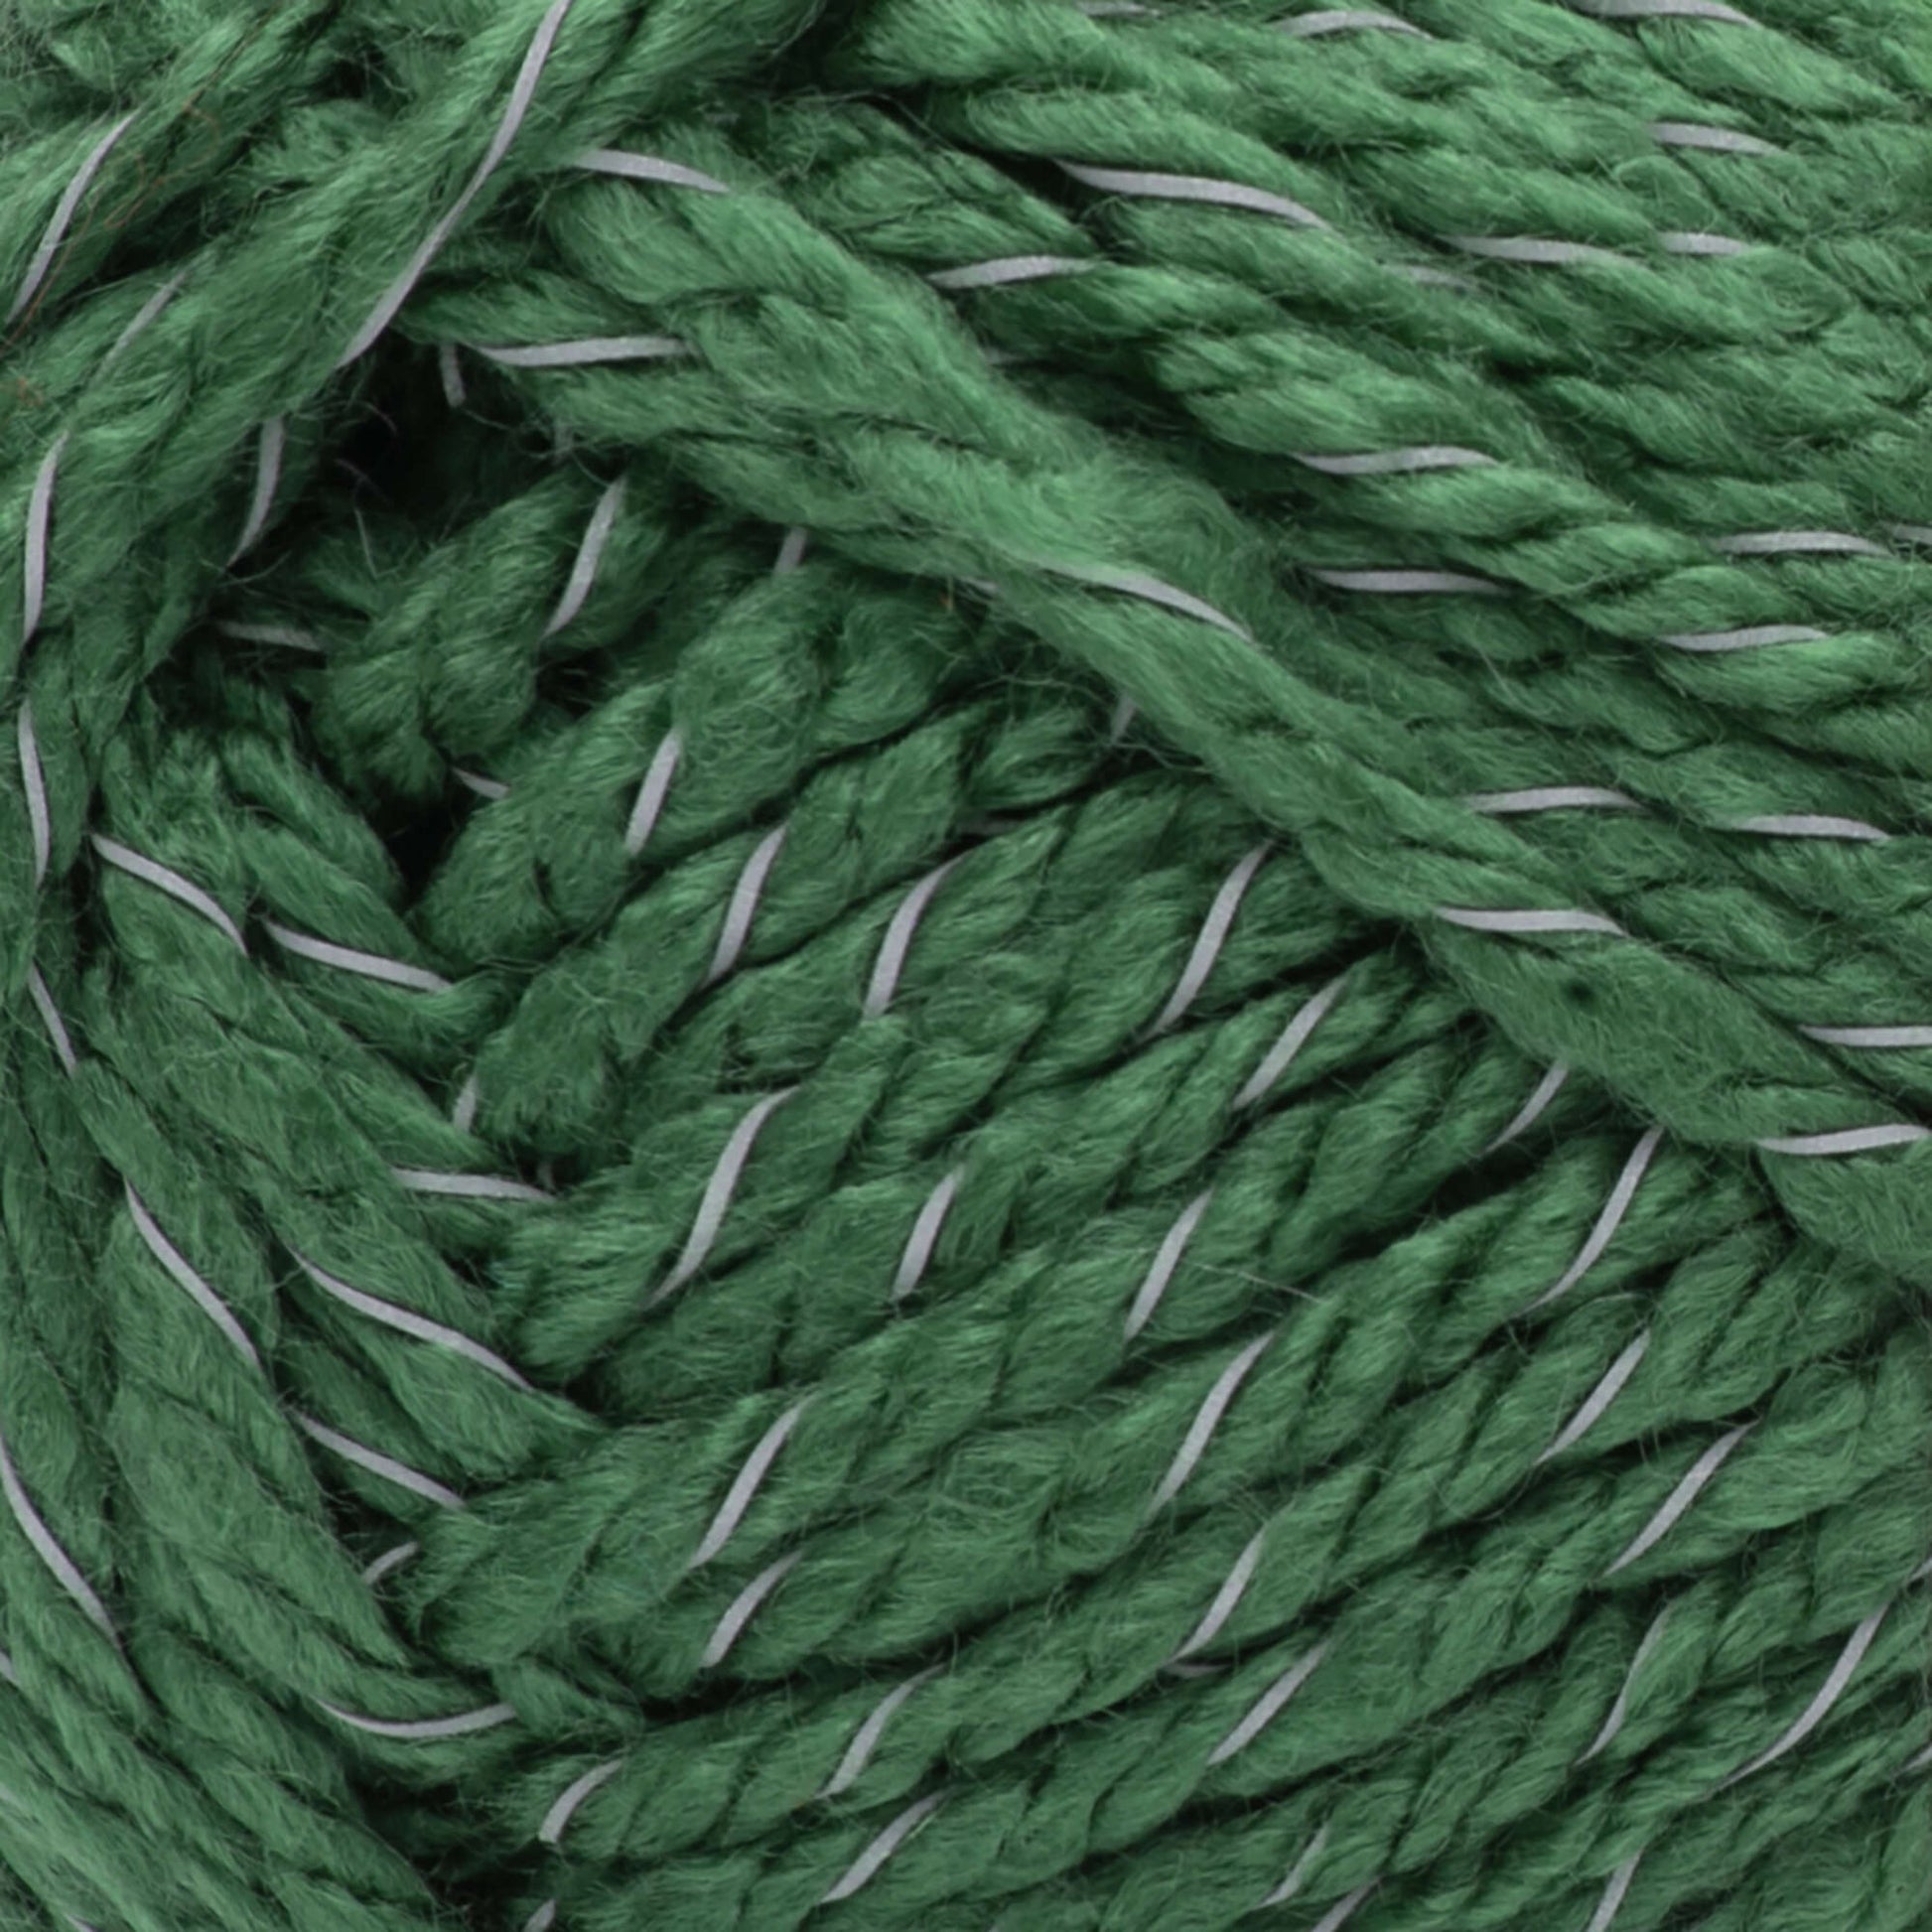 Red Heart Reflective Yarn - Discontinued Shades Olive